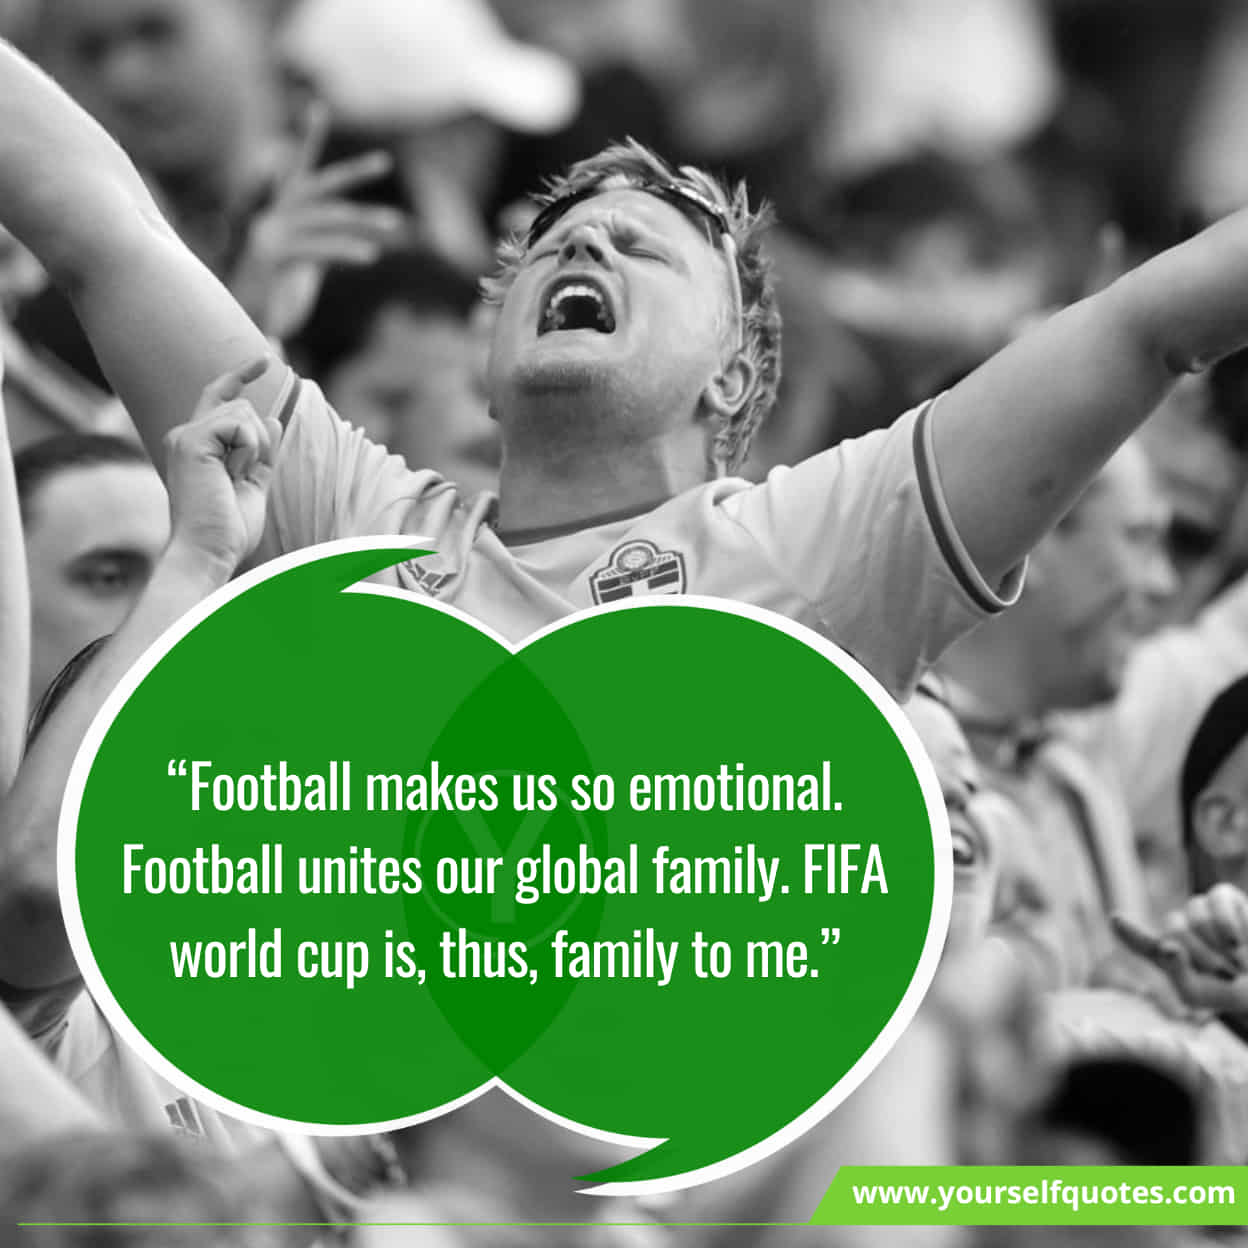 FIFA World Cup Quotes By Famous Athletes